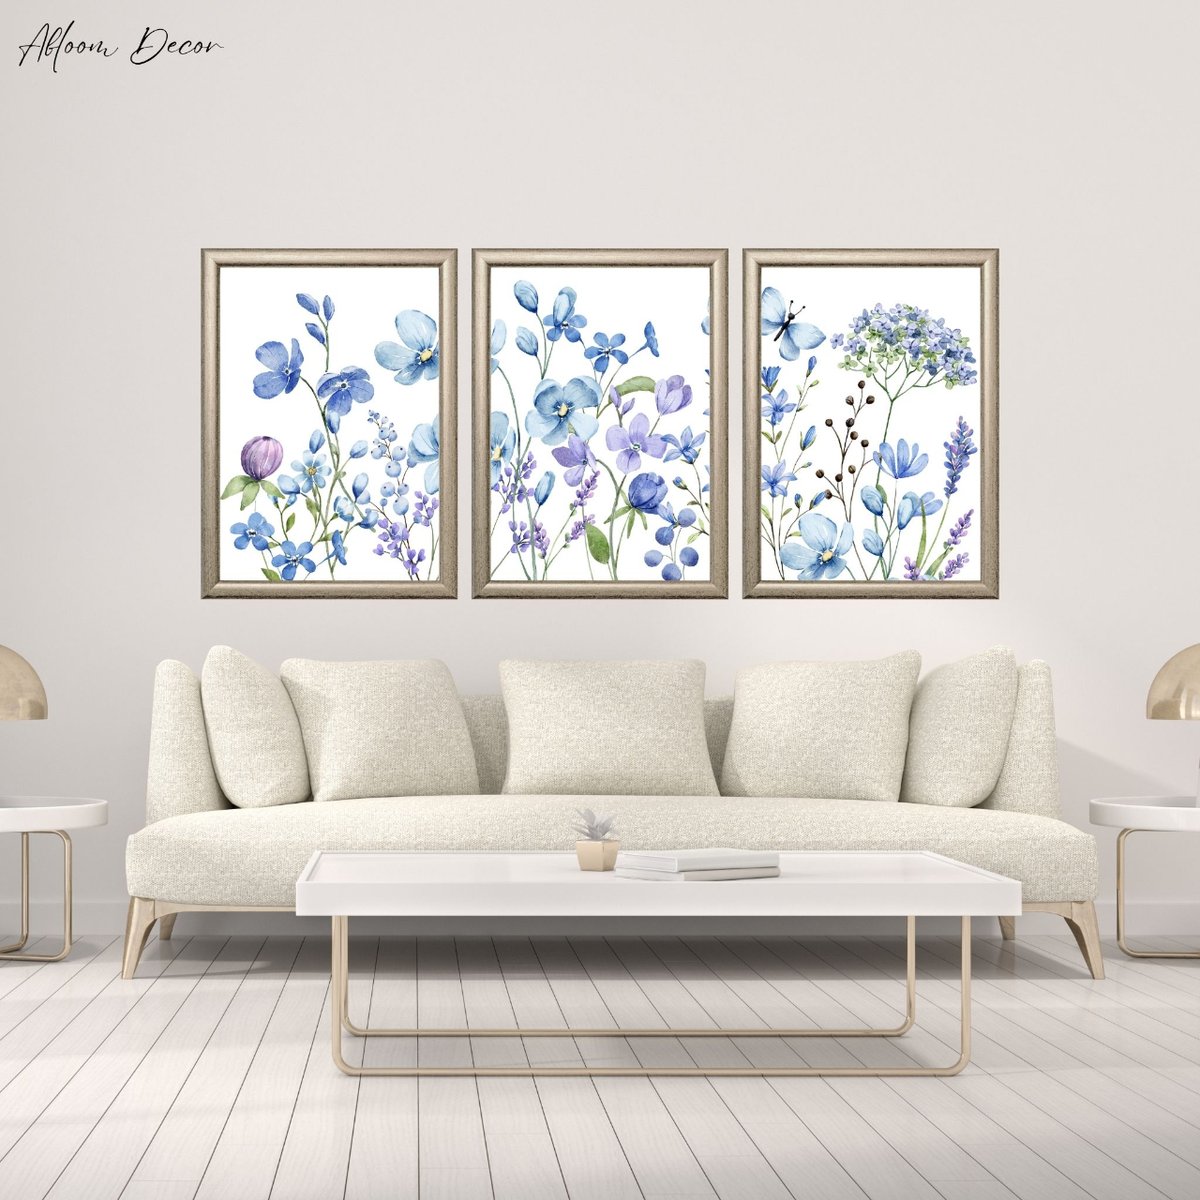 🌿FREE Blue Flower Wall Art Prints🌿 This wall decor captures nature’s delicate beauty, featuring an array of blue blooms accented by subtle hints of purple flowers. abloomdecor.com/blue-flower-wa… #wildflowerart #freewallart #livingroomwallart #flowerwallart